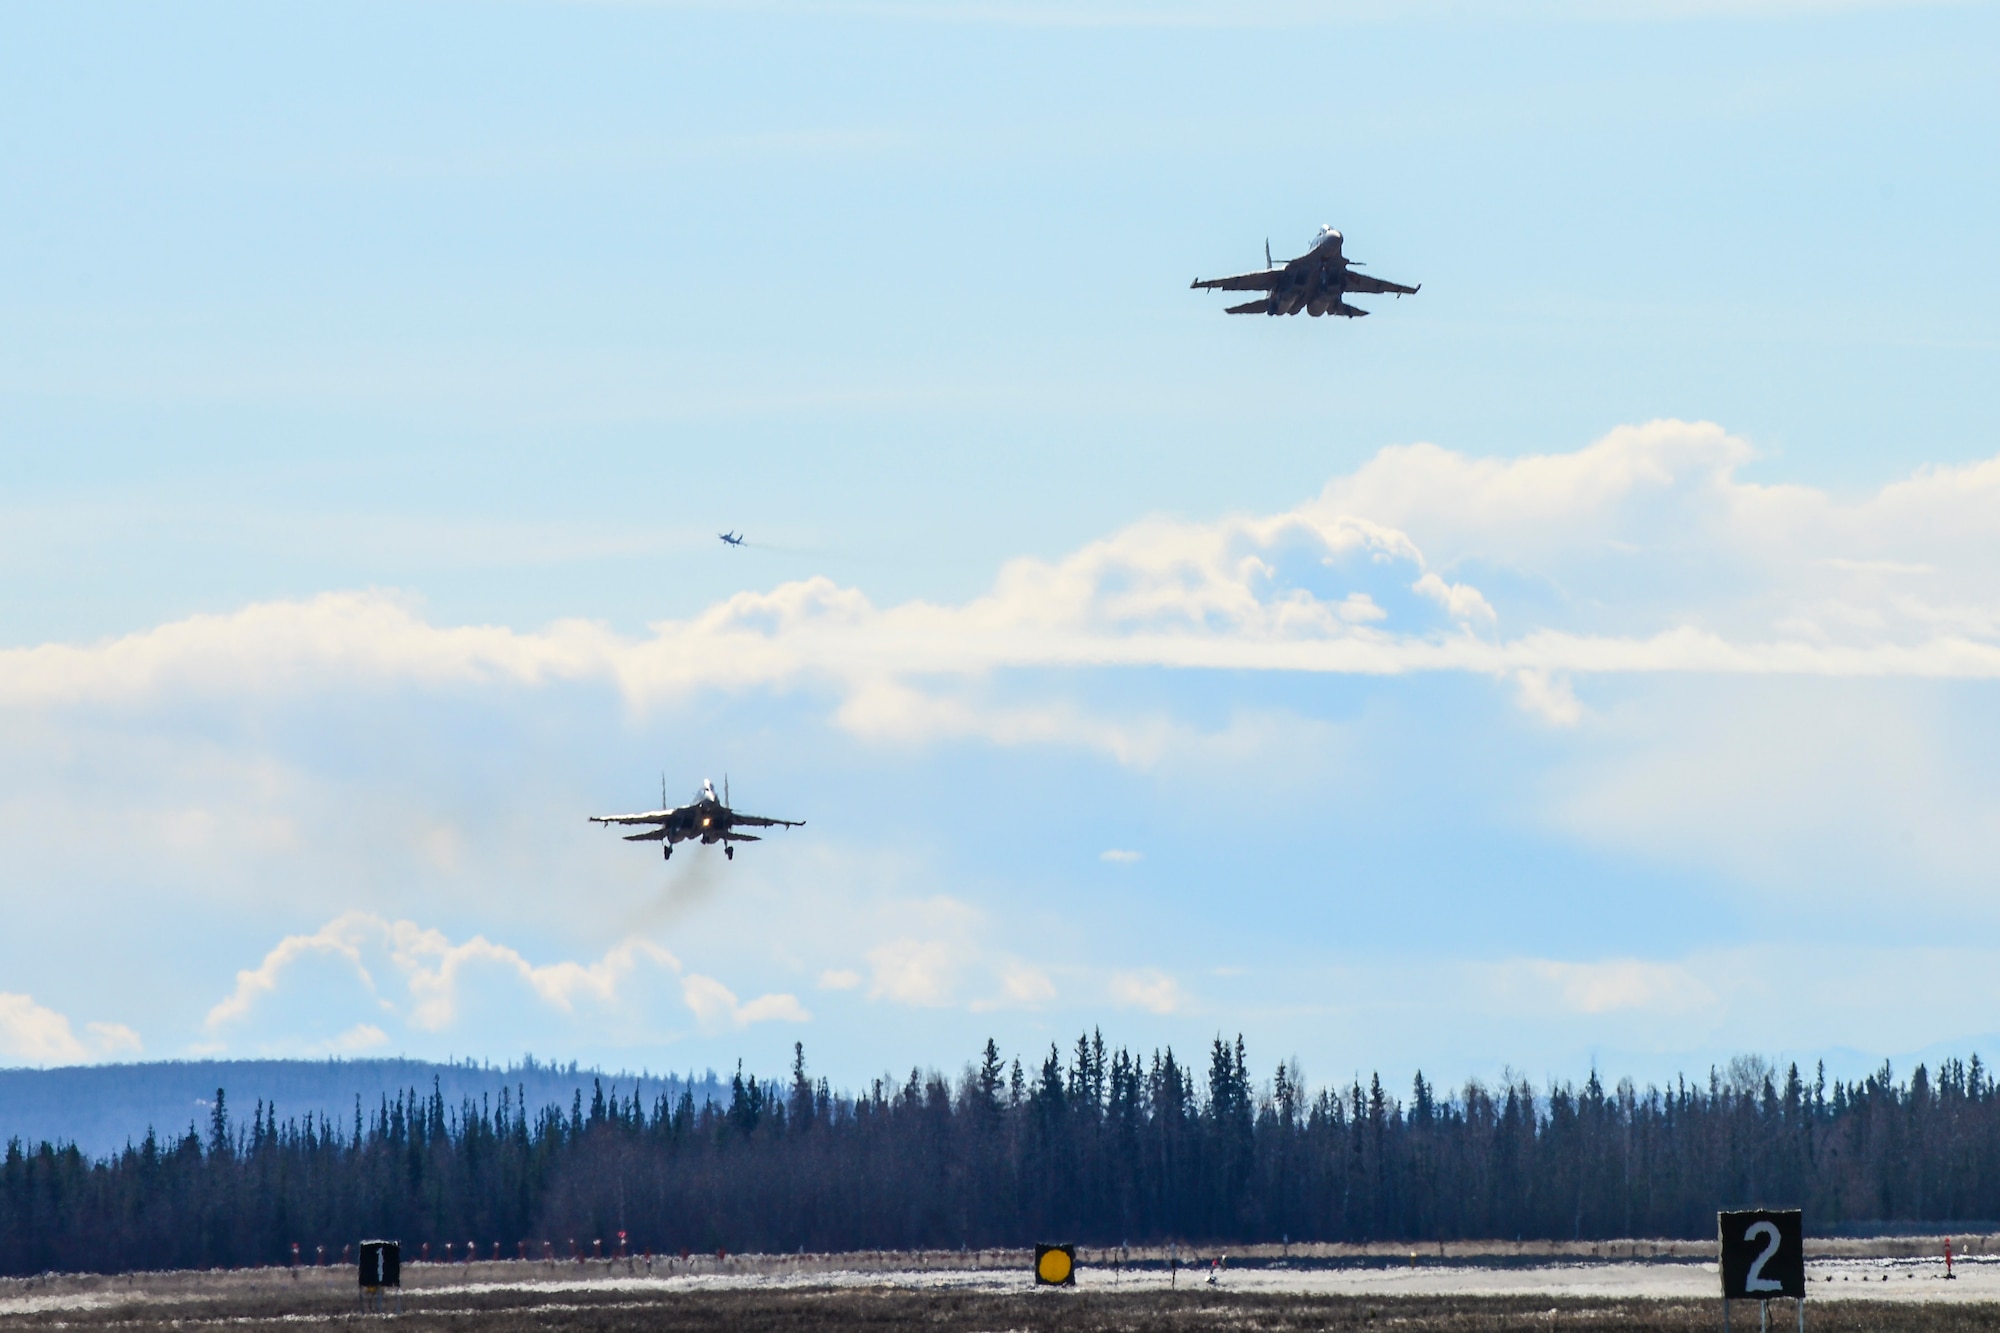 Indian Air Force Su-30MKI fighter aircraft prepare to land at Eielson Air Force Base, Alaska, April 16, 2016. Indian Air Force airmen arrived at Eielson in preparation for RED FLAG-Alaska 16-1. RF-A is a series of Pacific Air Forces commander-directed field training exercises for U.S. and partner nation forces, providing combined offensive counter-air, interdiction, close air support and large force employment training in a simulated combat environment. (U.S. Air Force photo by Staff Sgt. Joshua Turner/Released)